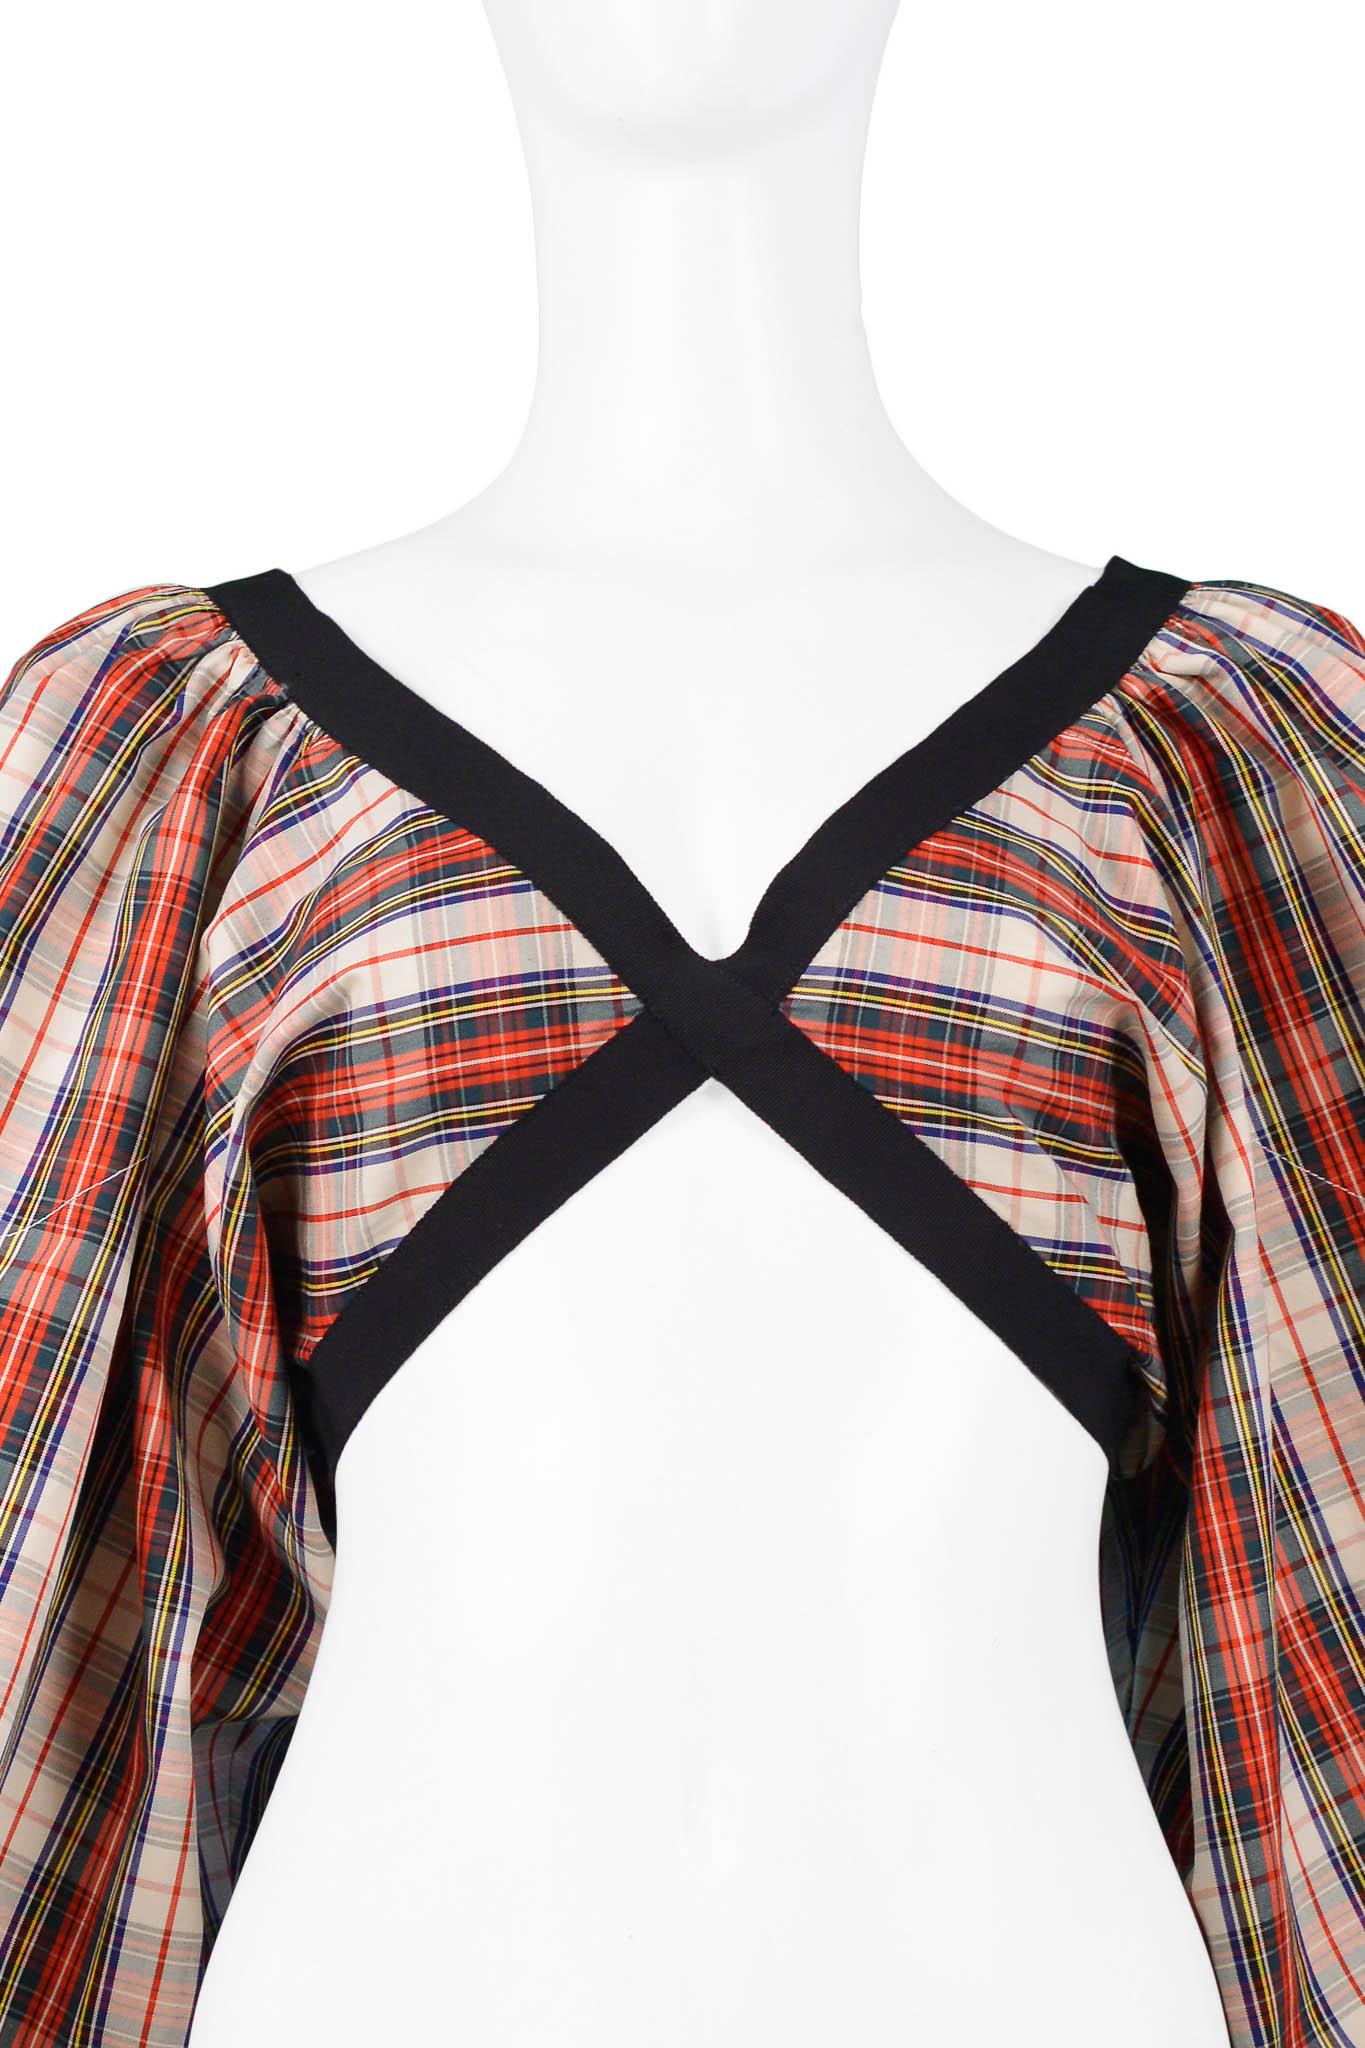 Resurrection Vintage is excited to offer a vintage Isaac Mizrahi crop top featuring a red, white and place plaid print, cross

Mizrahi
Size: Small
Cotton
Excellent Vintage Condition
Authenticity Guaranteed